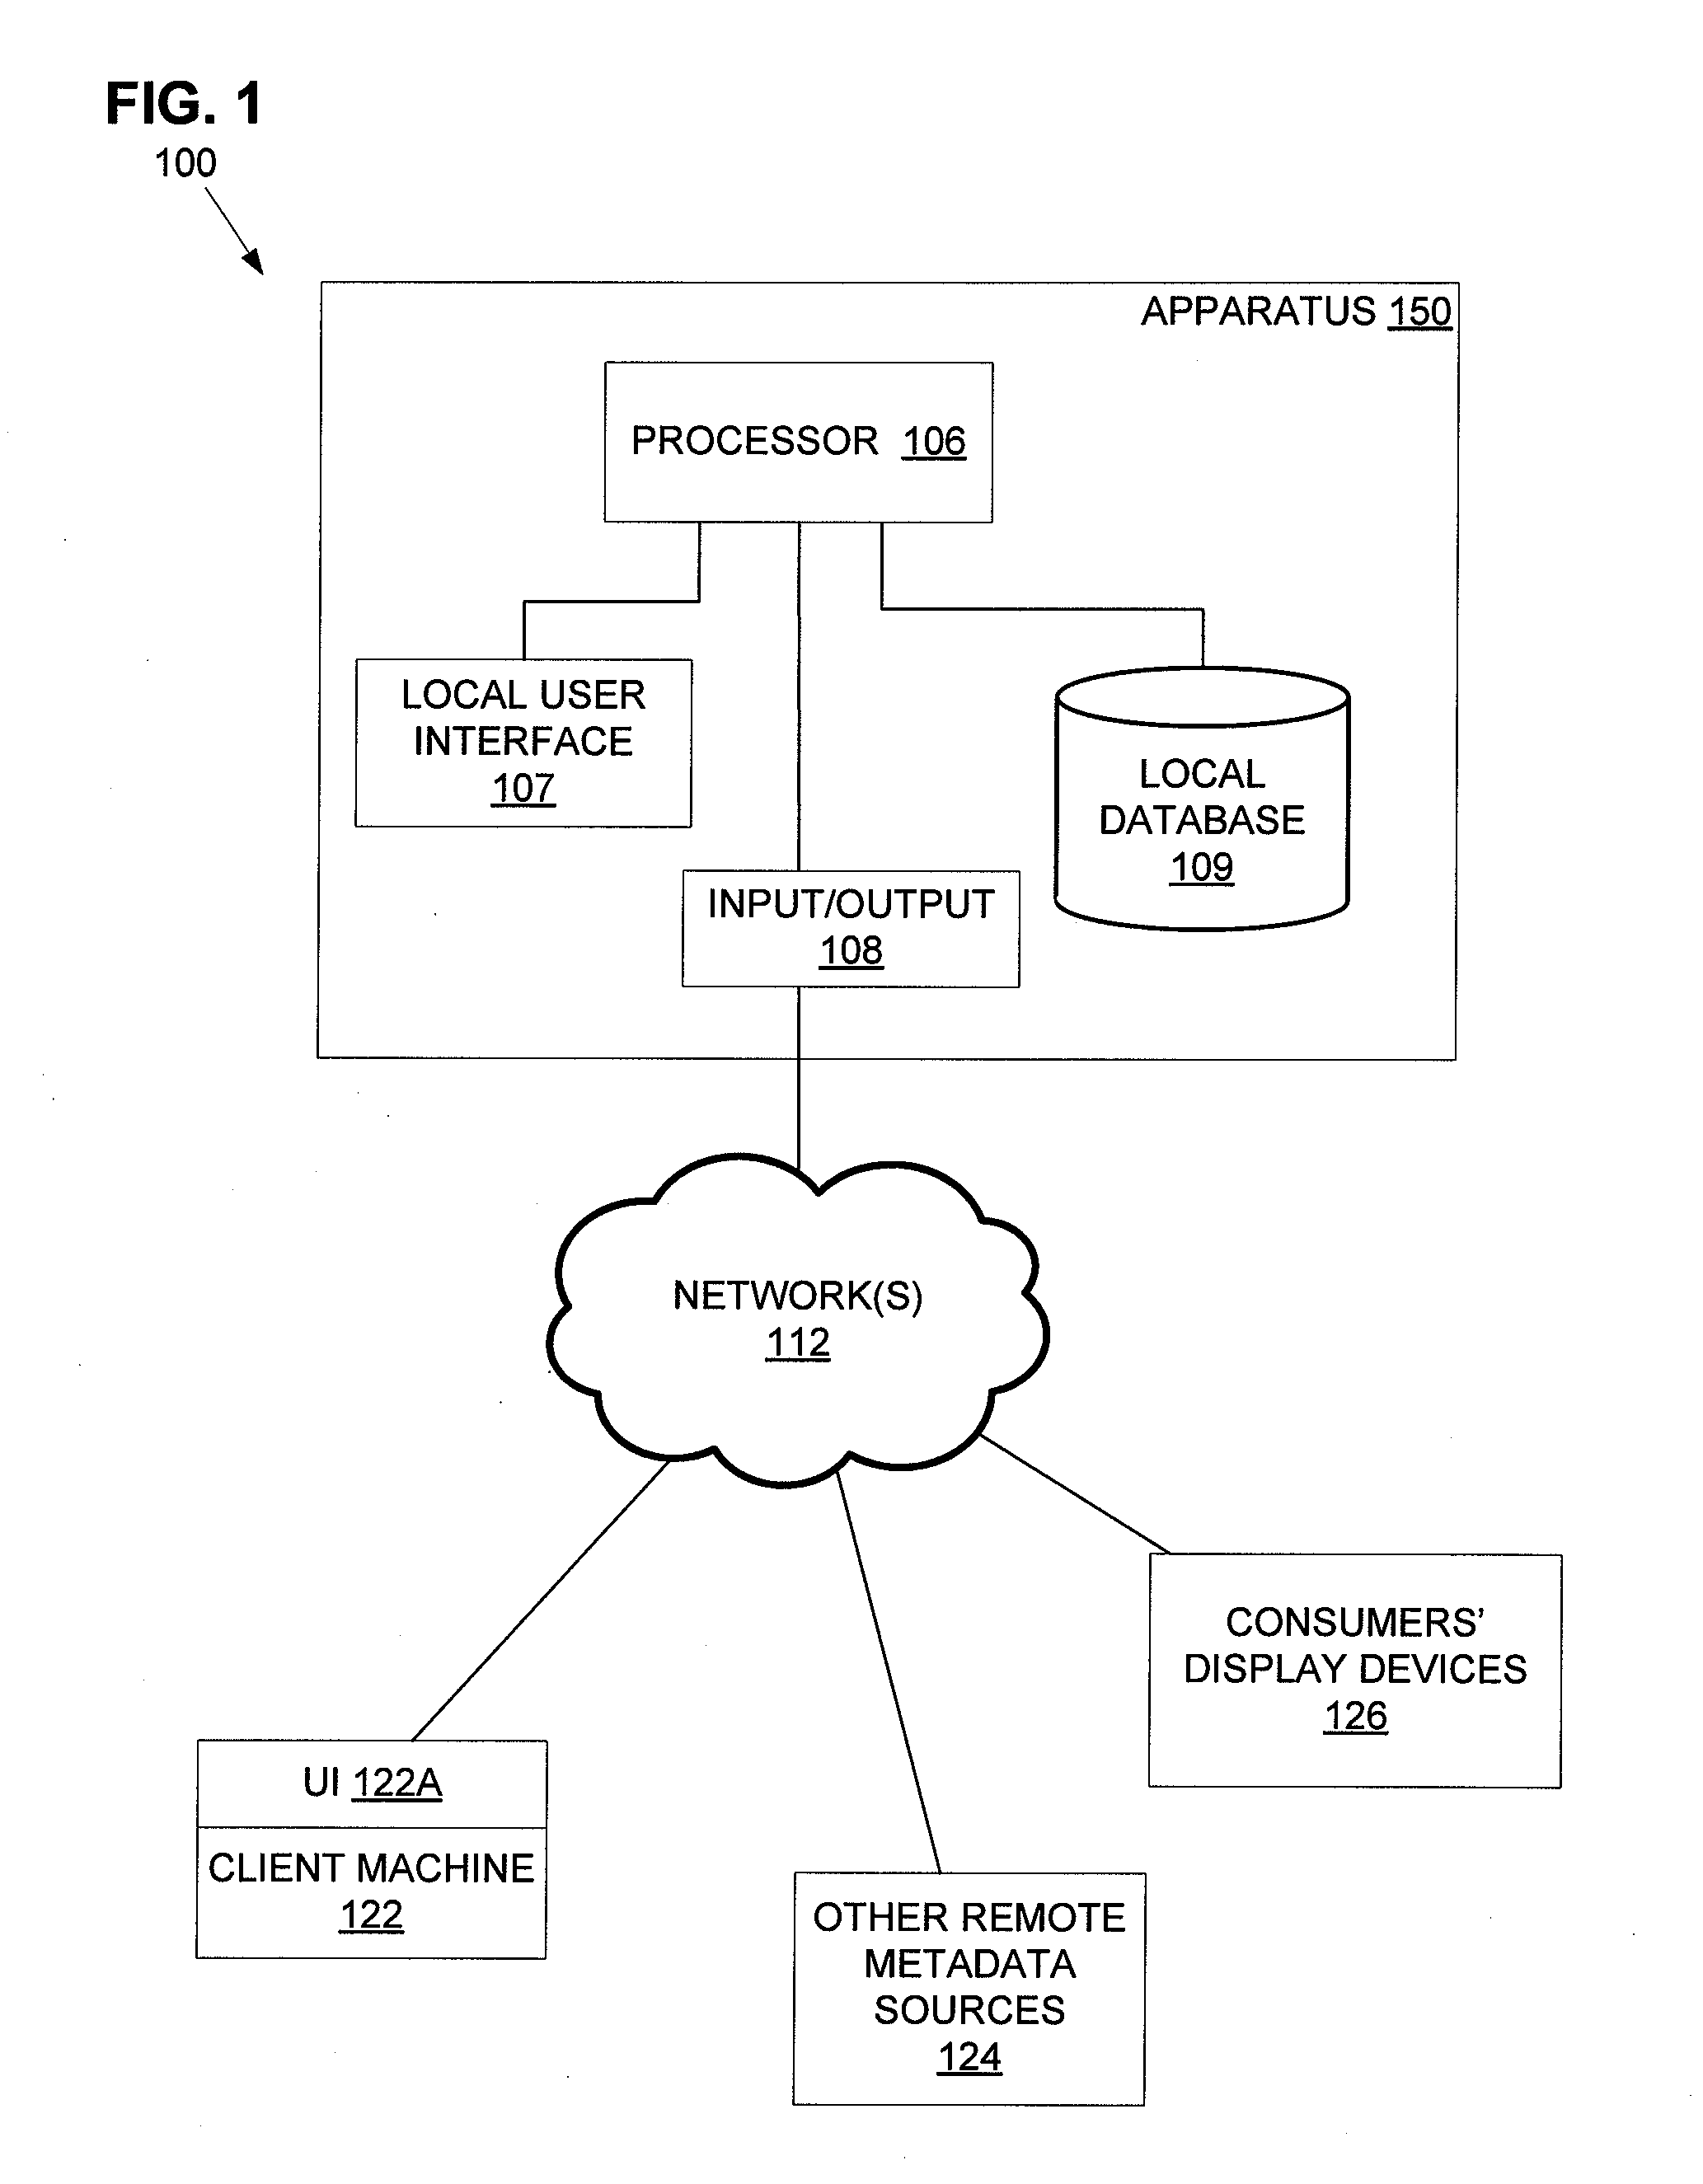 Delivery forecast computing apparatus for display and streaming video advertising